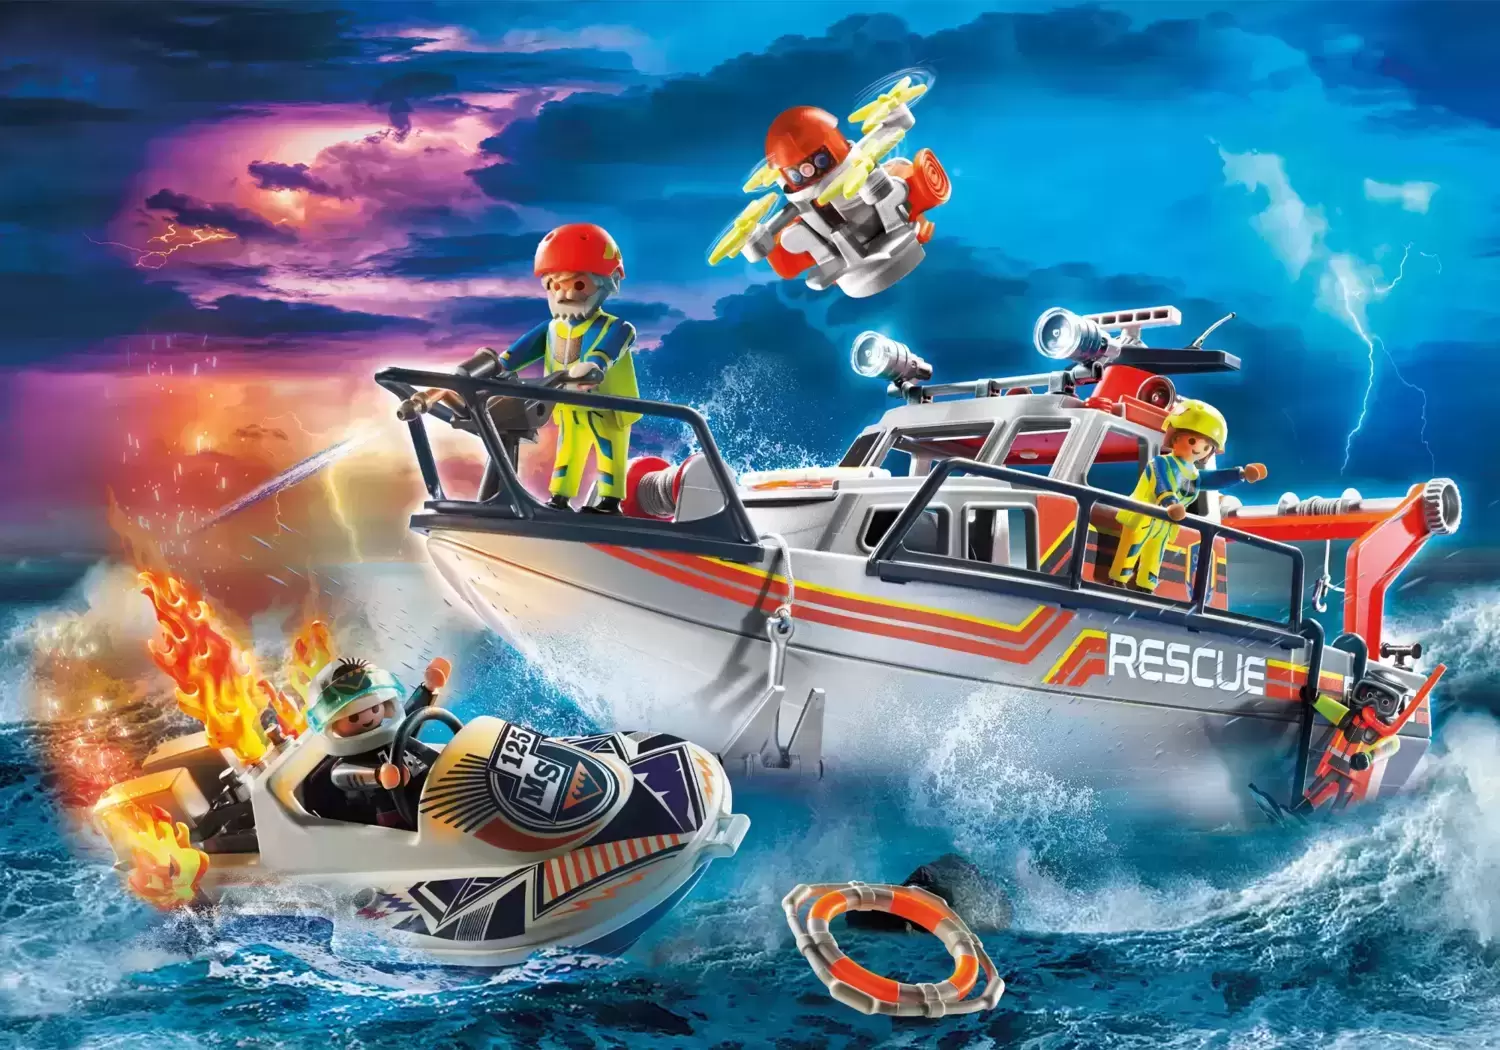 Playmobil Rescuers & Hospital - Fire Rescue with Personal Watercraft